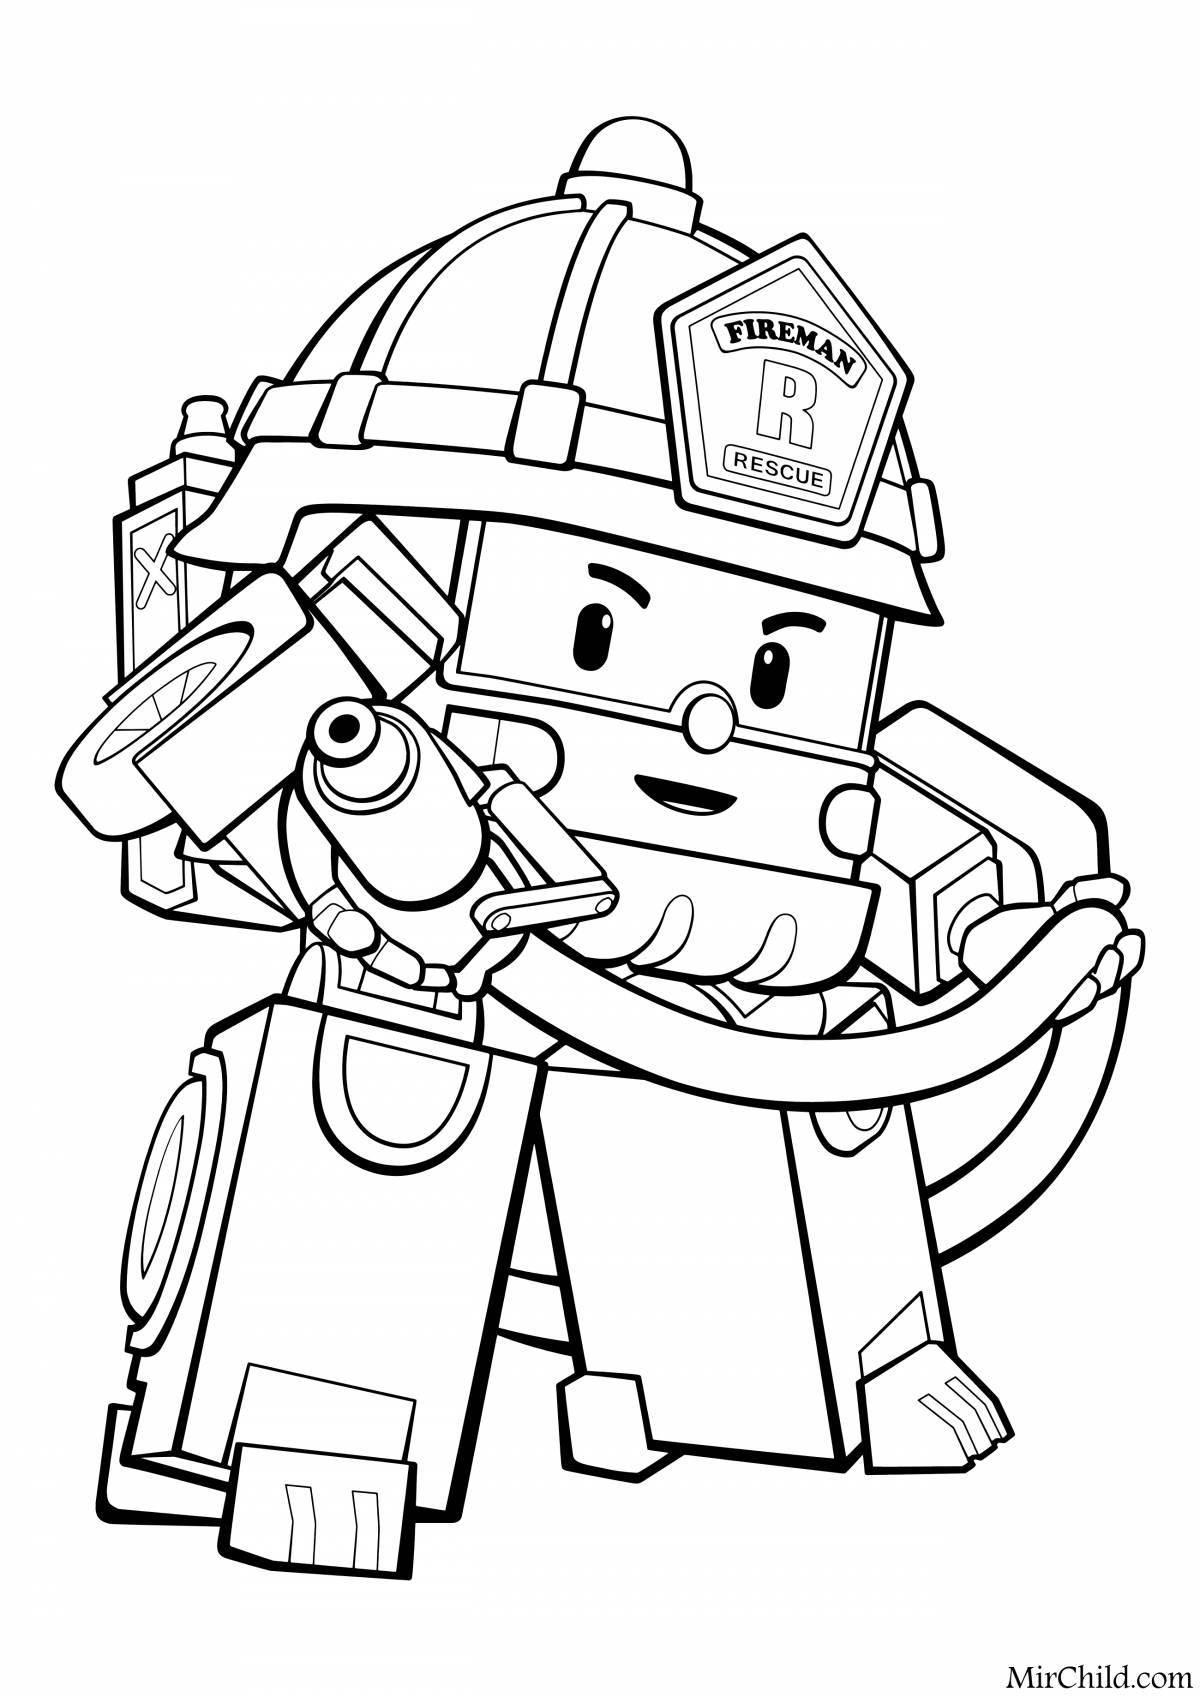 Fabulous swarm coloring page